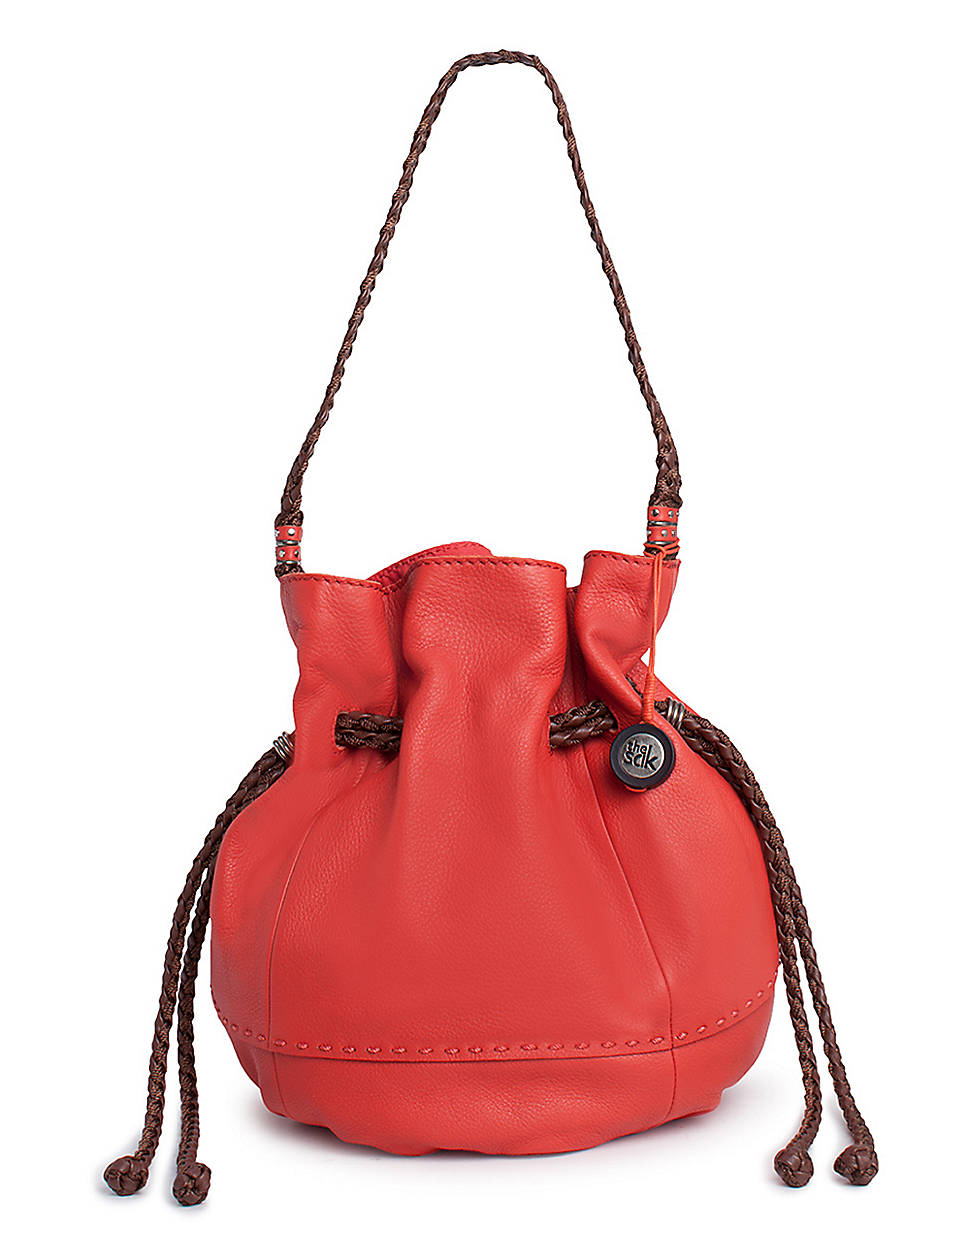 Lyst - The Sak Indio Leather Drawstring Tote Bag in Red